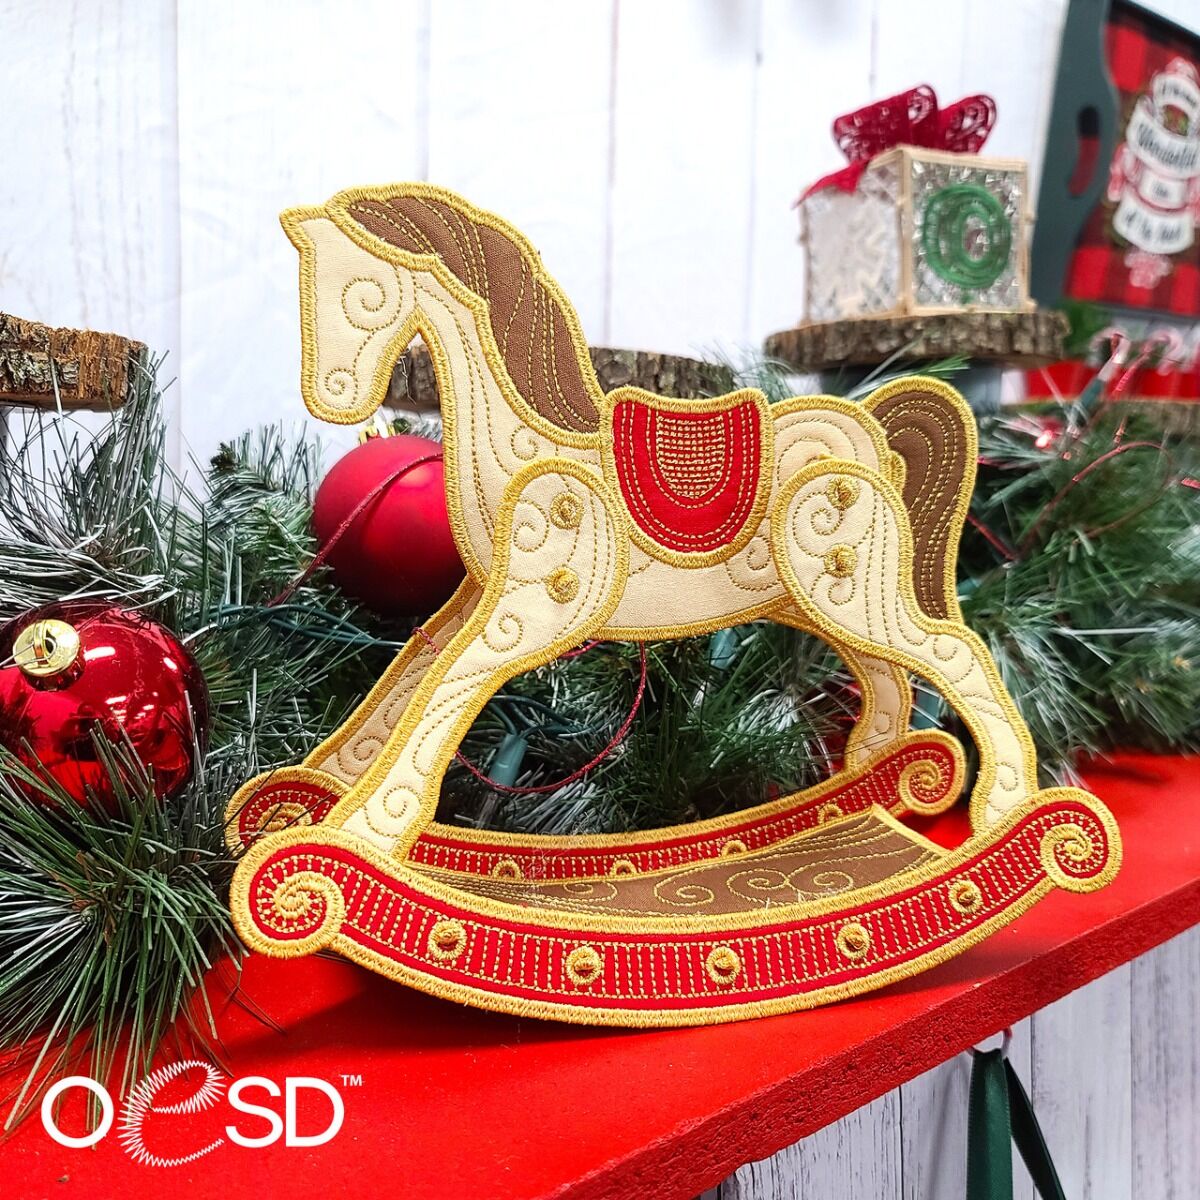 OESD Free Standing Lace Rocking Horse,OESD Free Standing Lace Rocking Horse,OESD Free Standing Lace Rocking Horse,OESD Free Standing Lace Rocking Horse